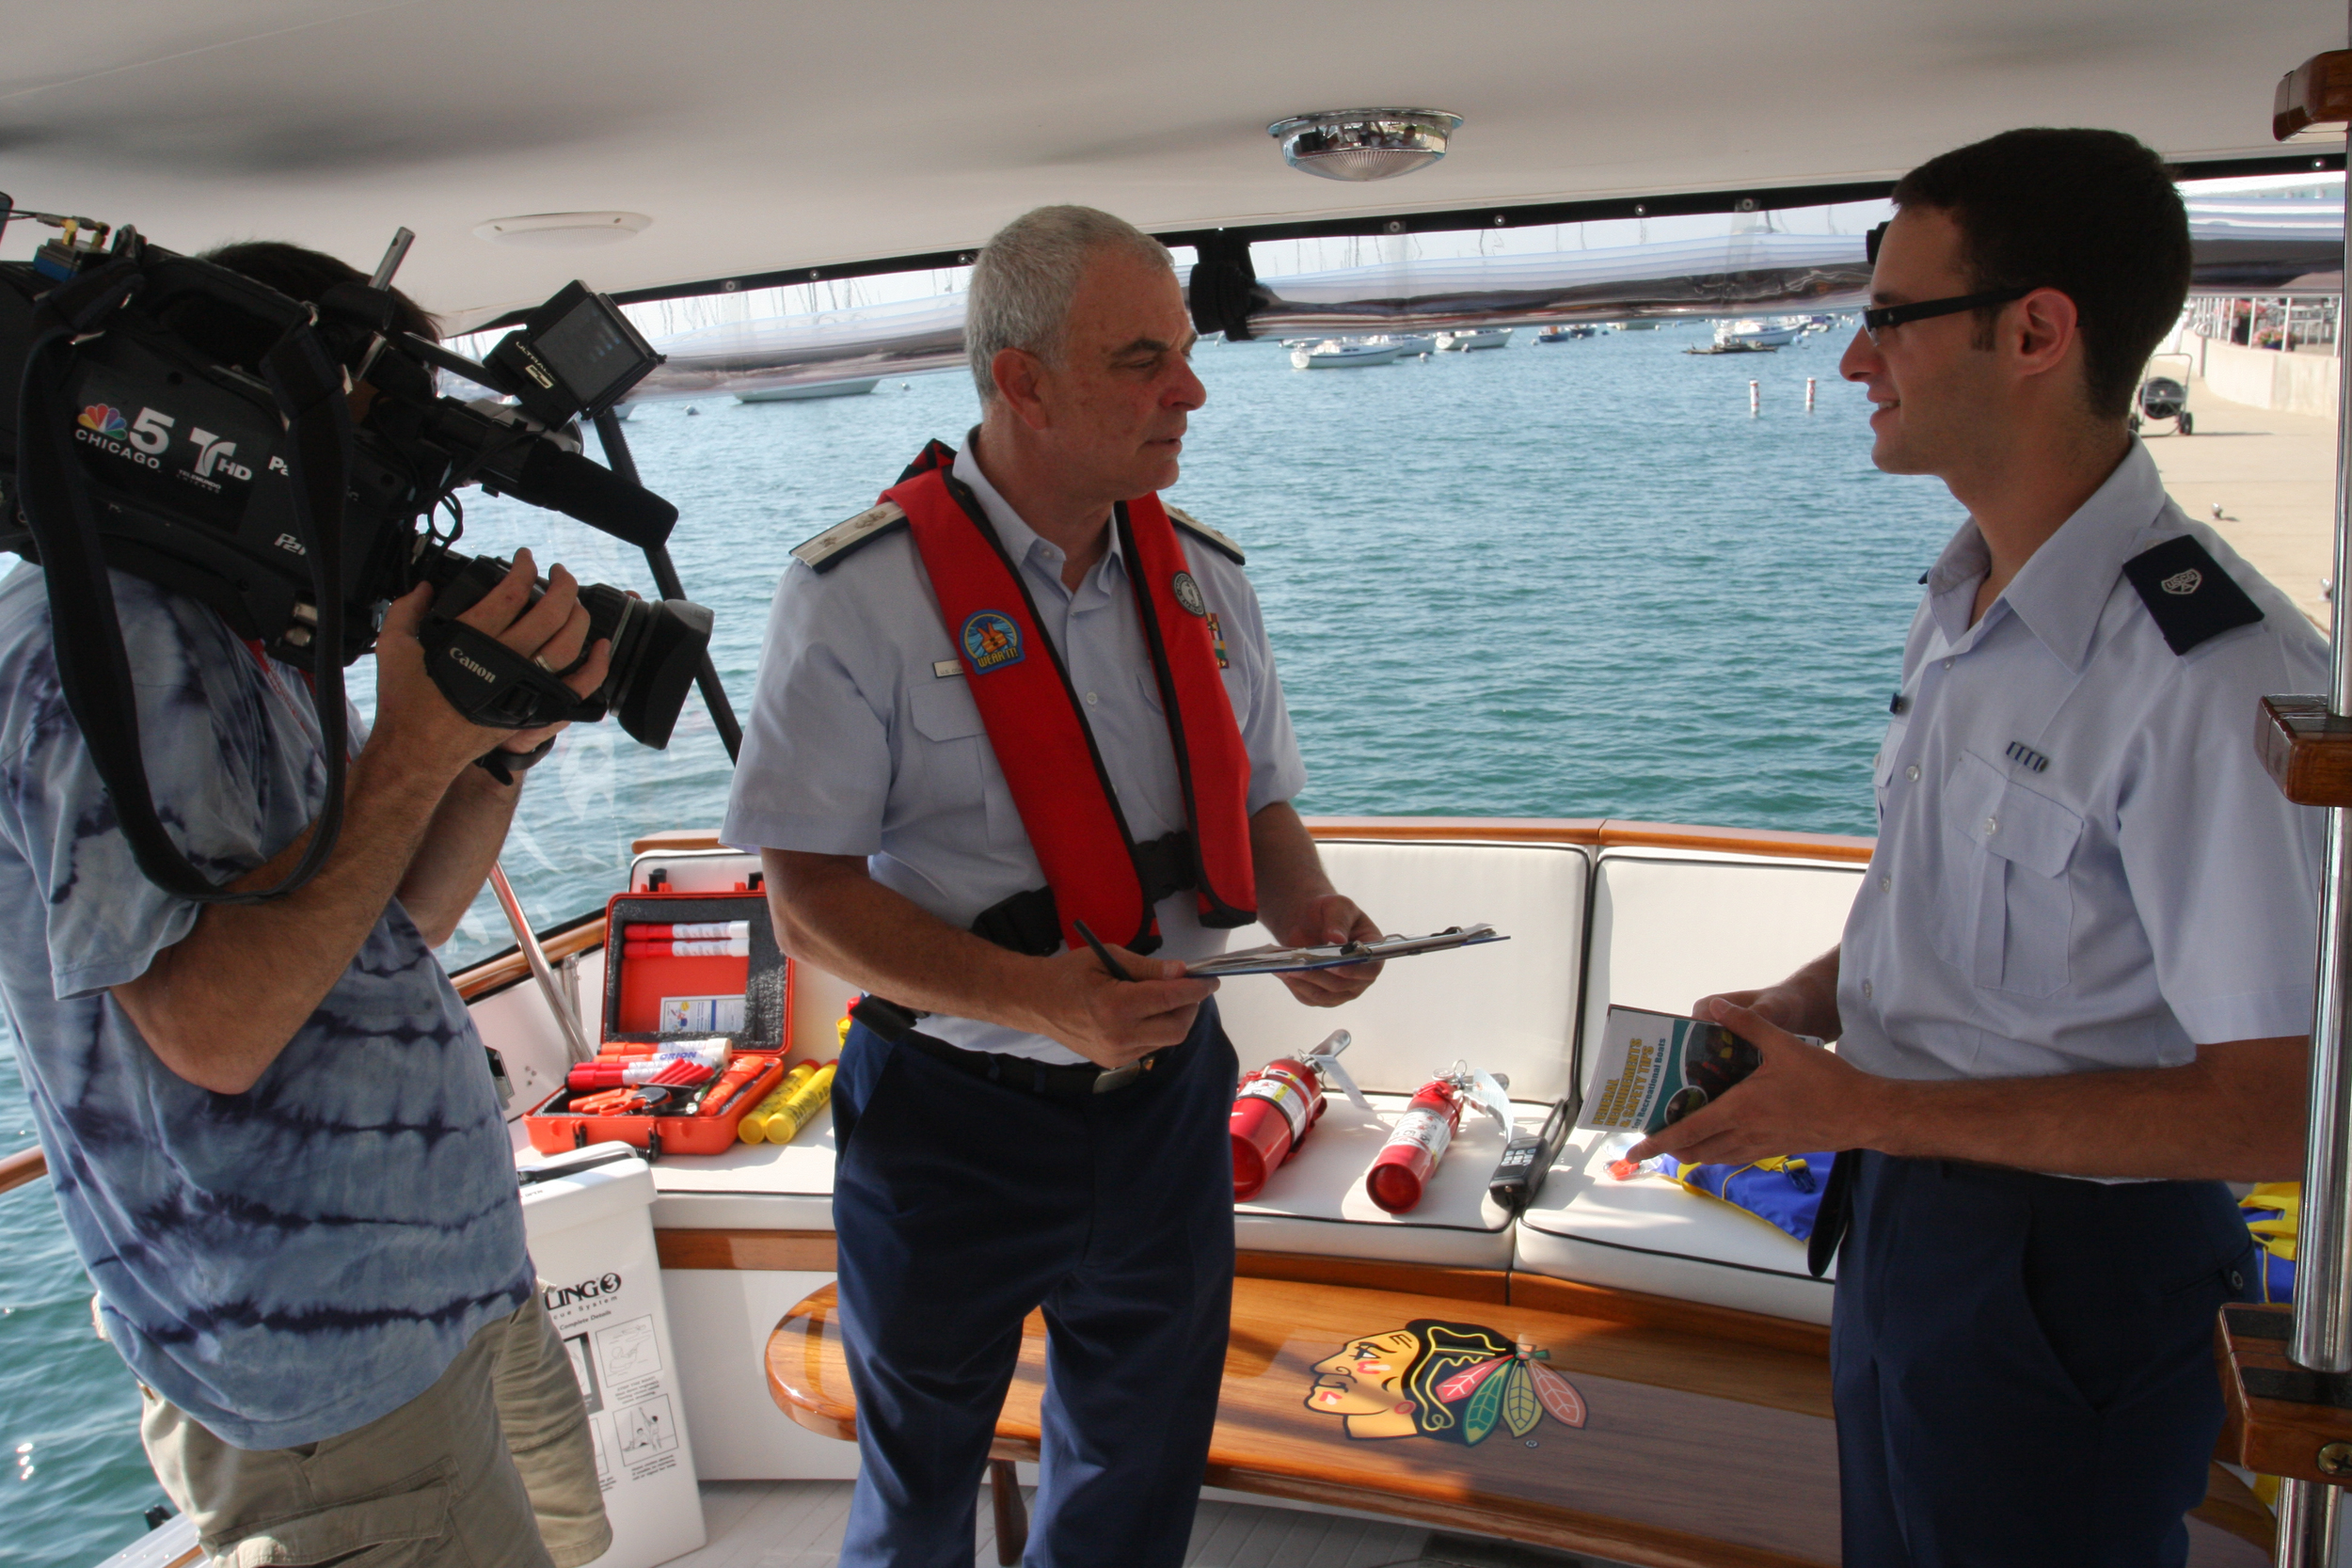  Roth talks with past District 9WR Commodore Randy Podolsky and a news cameraman on the yacht "Blackhawk" at Monroe Harbor in Chicago, July 19, 2013. Earlier, Commodore Podolsky emphasized the Auxiliary's boating safety mission on live television. Ro